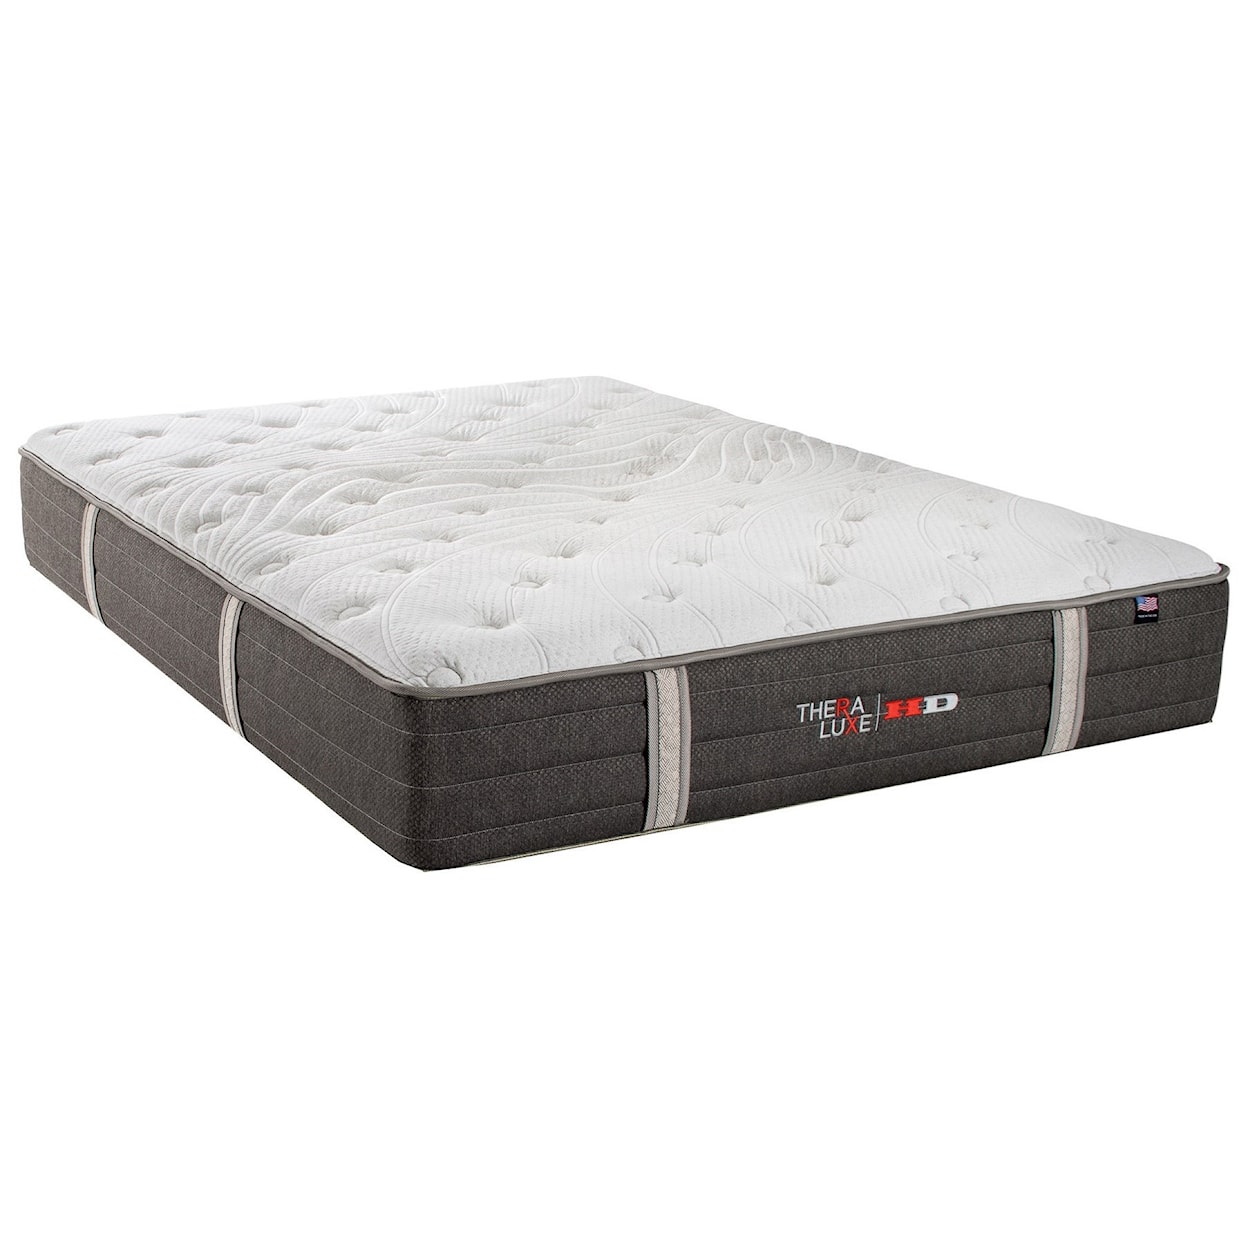 Therapedic Theraluxe Aspen Twin XL Firm Pocketed Coil Mattress